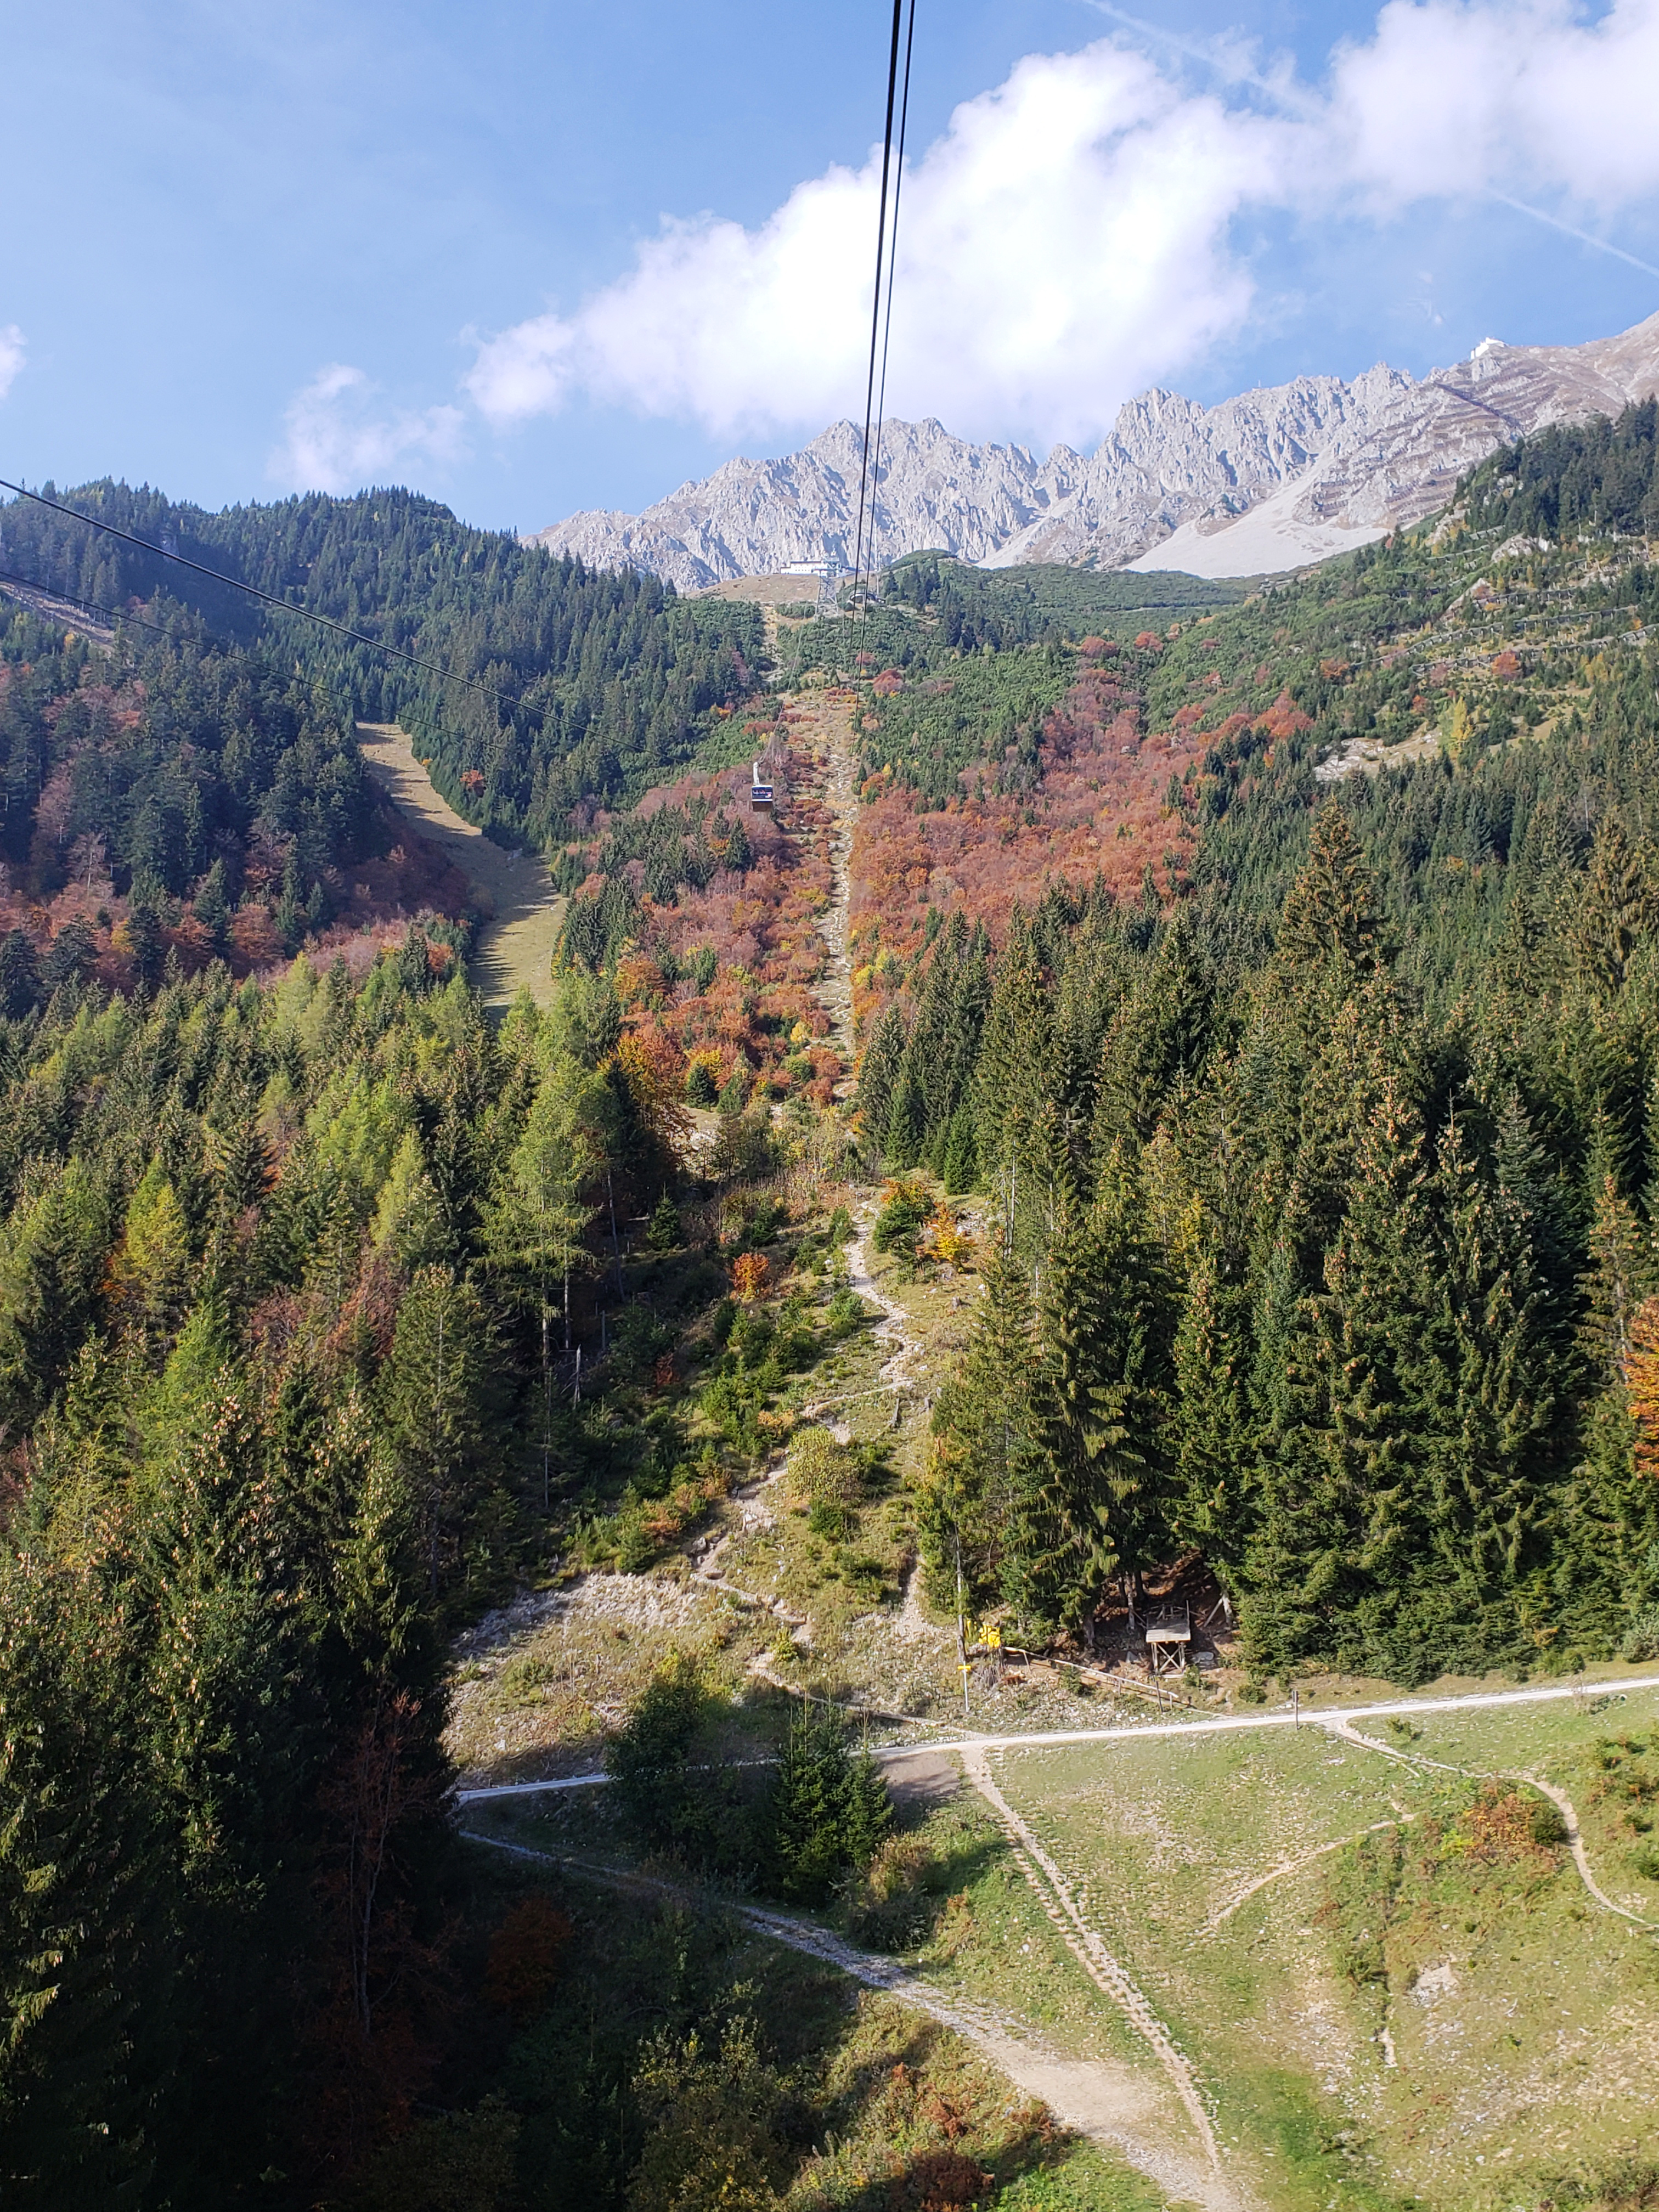 Riding_The_Innsbruck_Cable_Car - A_Guide_To_The_Nordkettenbahnen